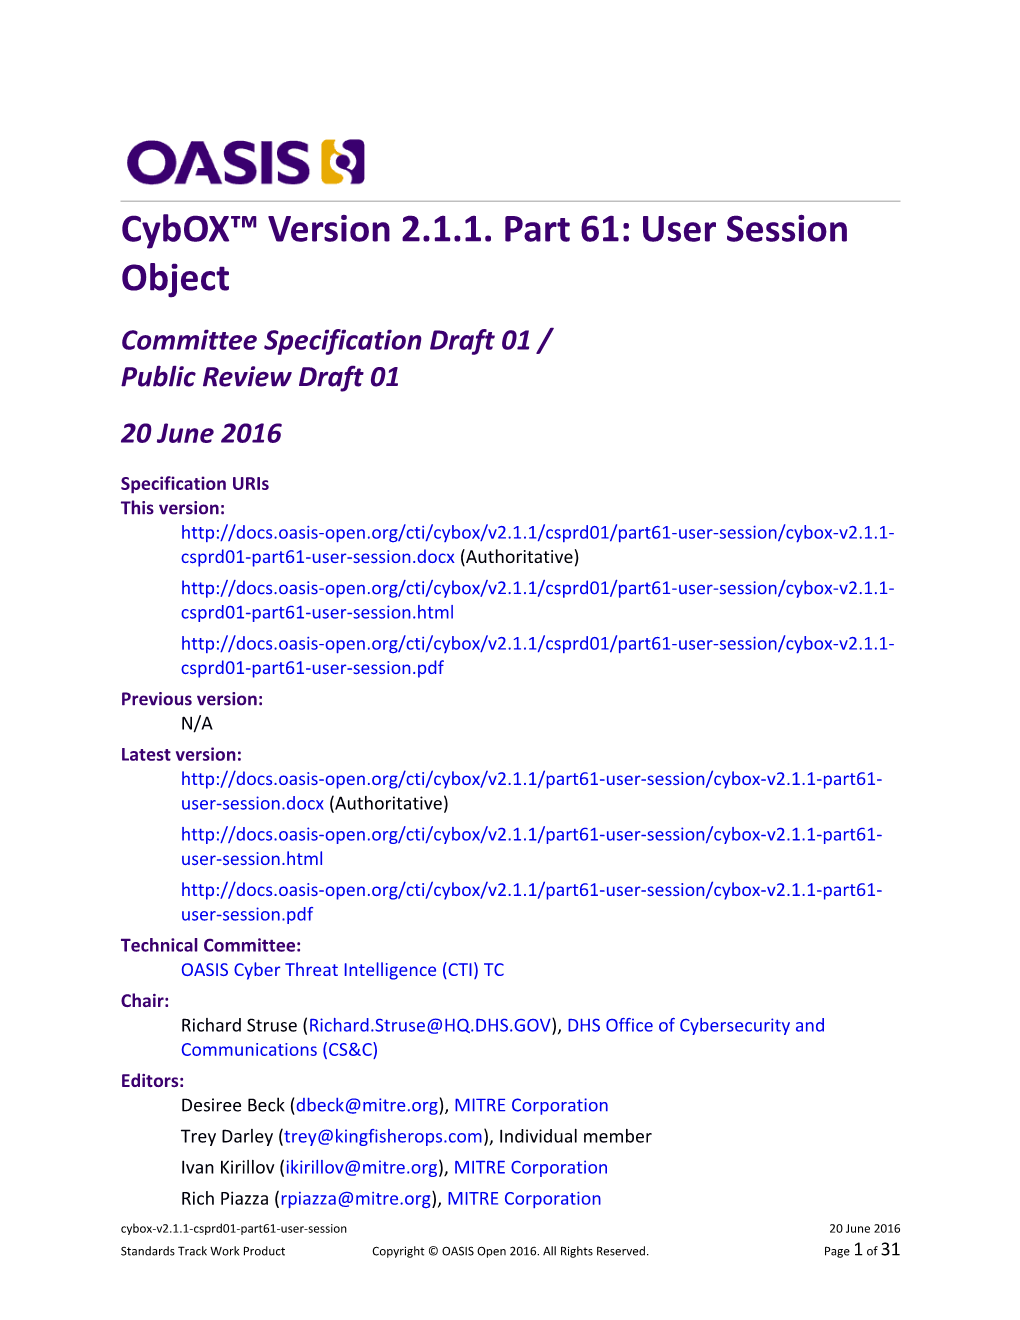 Cybox Version 2.1.1. Part 61: User Session Object